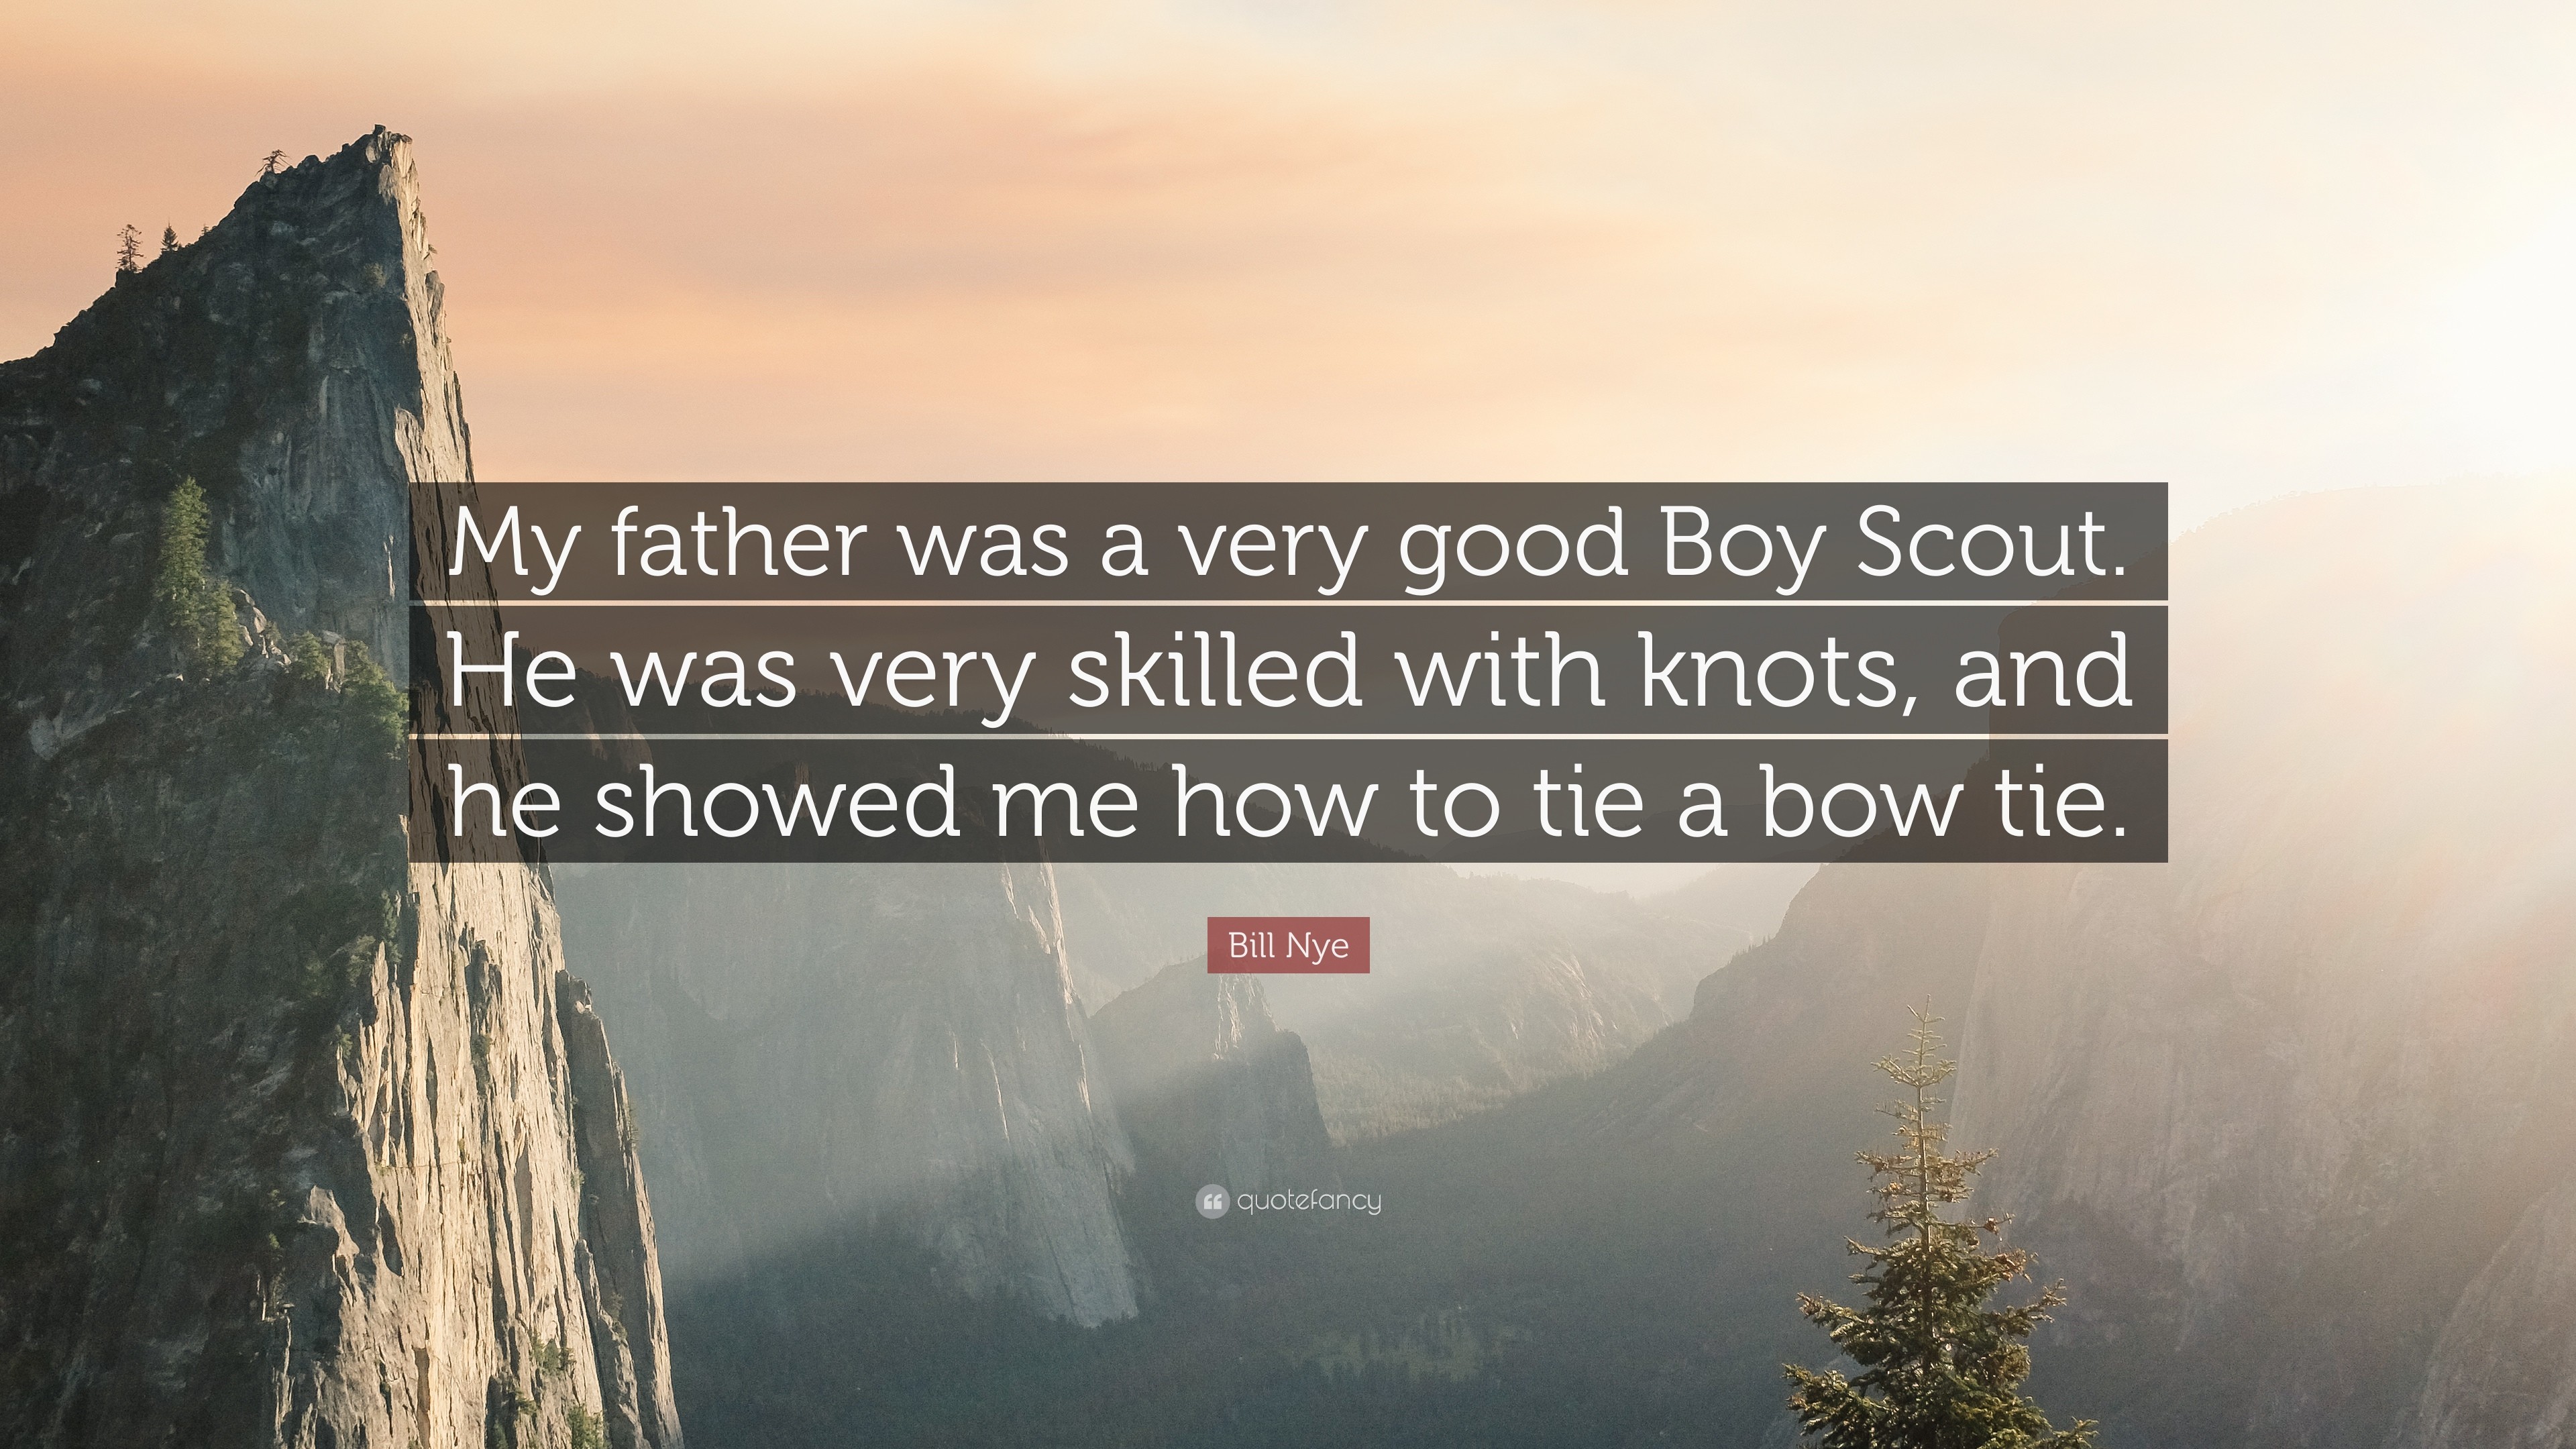 3840x2160 Bill Nye Quote: “My father was a very good Boy Scout. He was